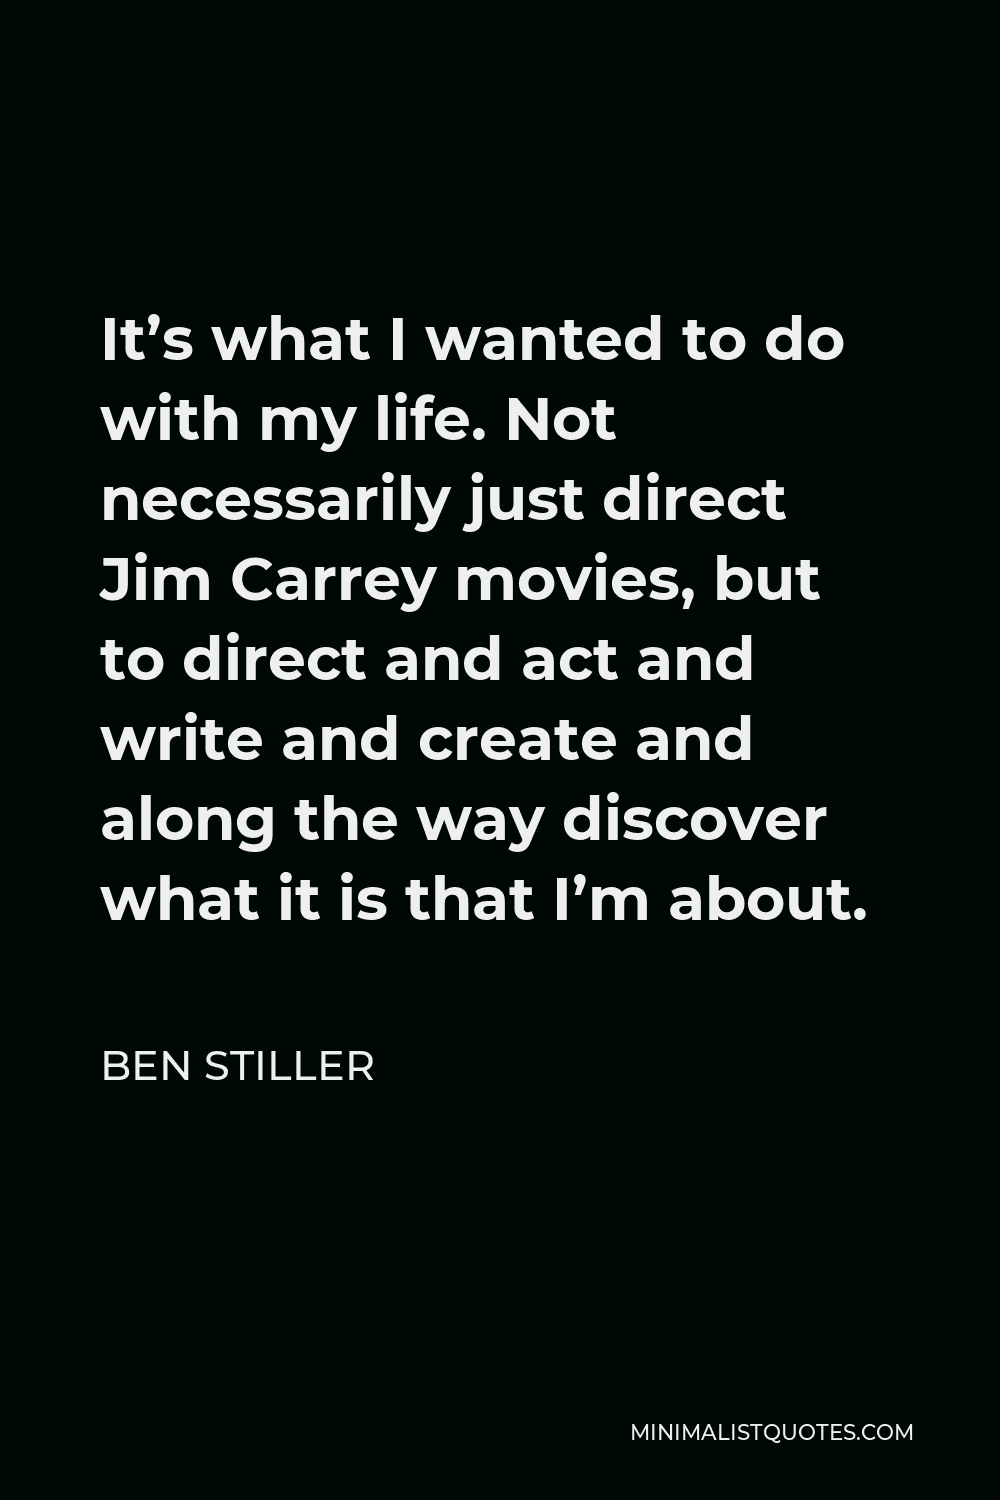 Ben Stiller Quote - It’s what I wanted to do with my life. Not necessarily just direct Jim Carrey movies, but to direct and act and write and create and along the way discover what it is that I’m about.